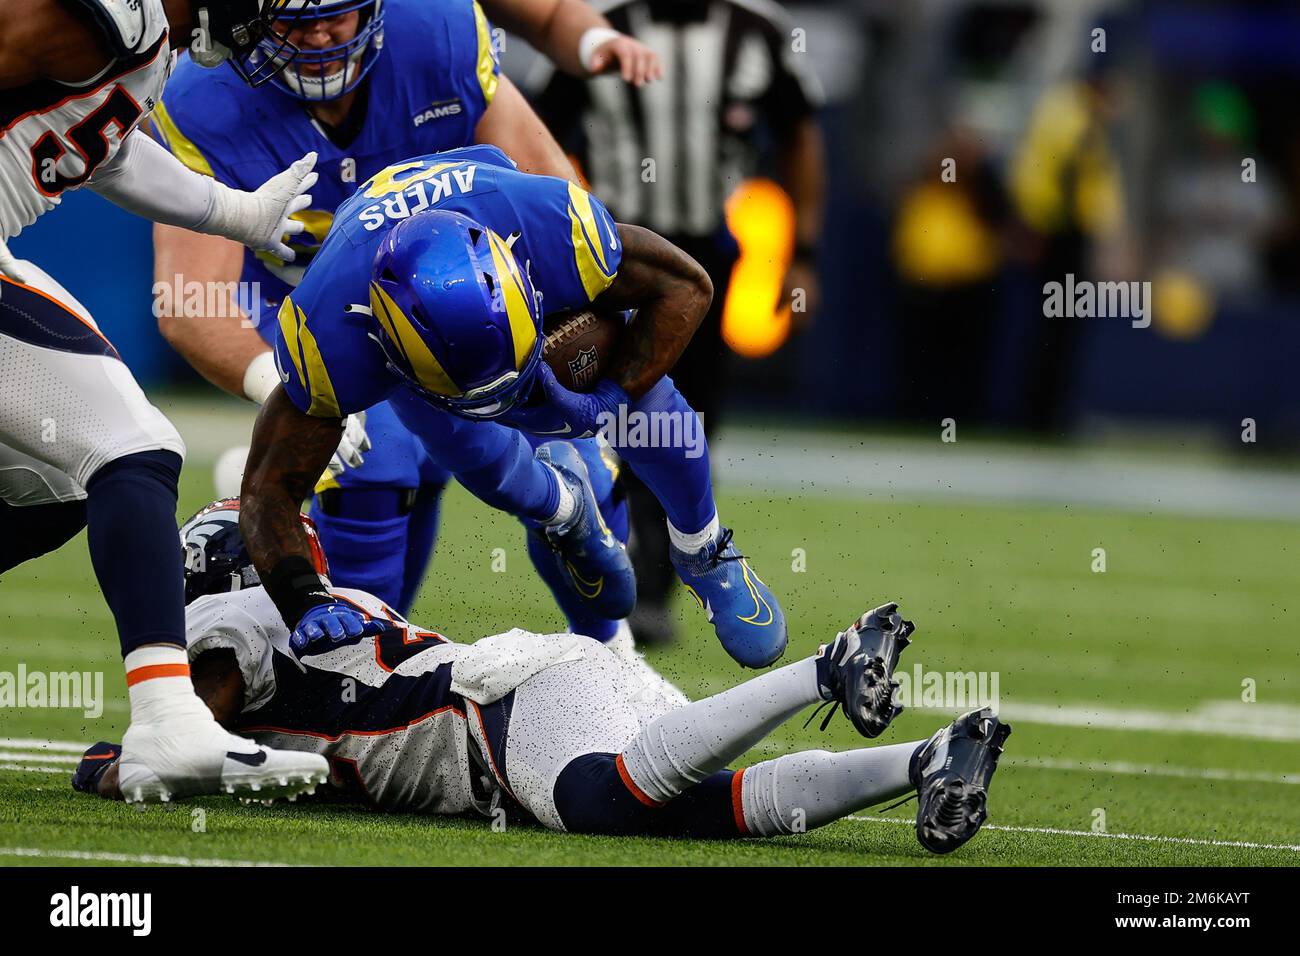 INGLEWOOD, CA - DECEMBER 25: Los Angeles Rams running back Cam Akers (3) dives for yards during the Denver Broncos vs Los Angeles Rams at Sofi Stadium Stock Photo